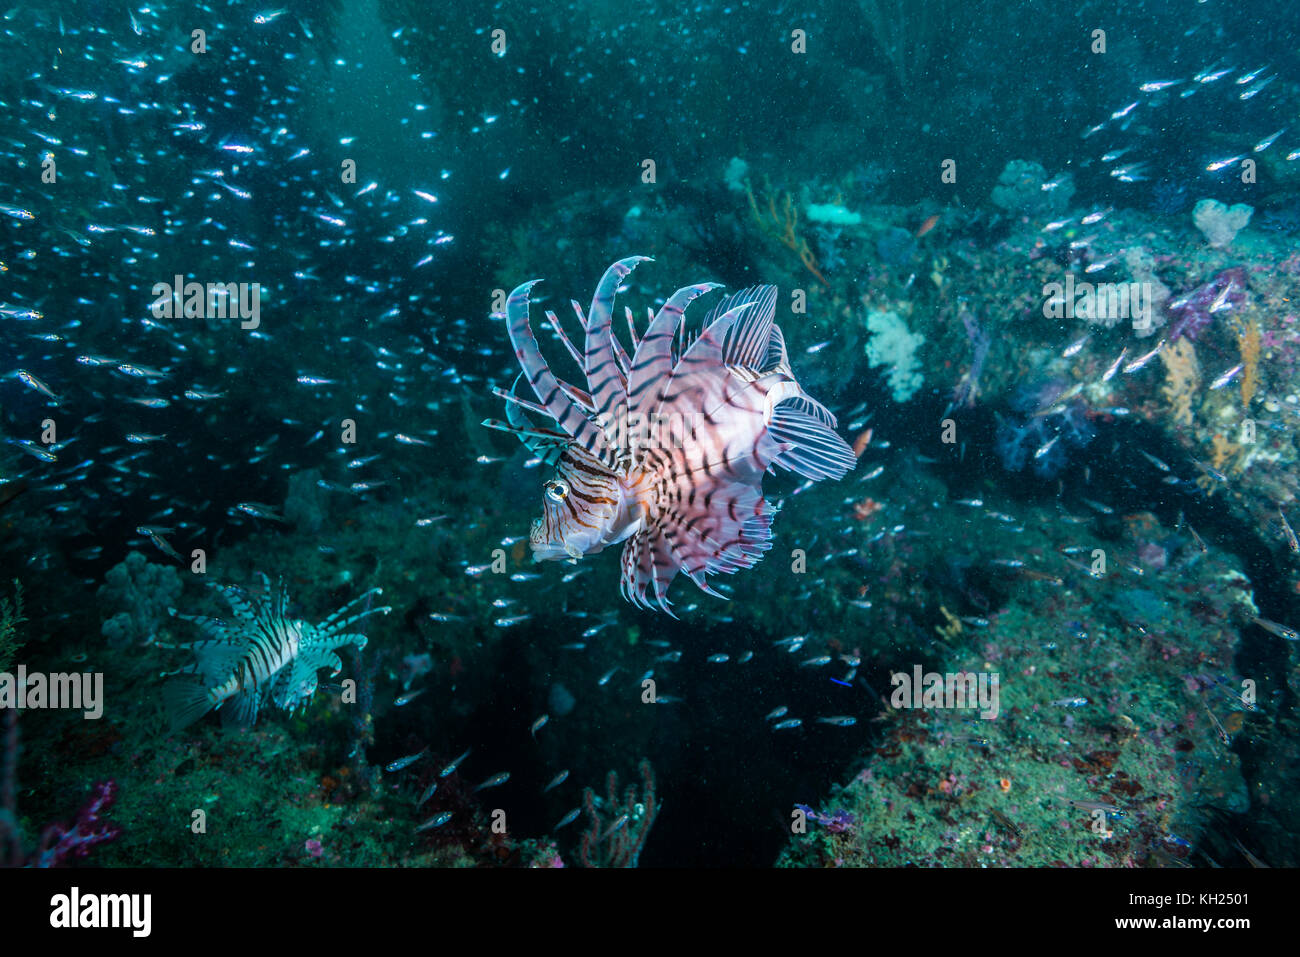 Luna lion fish (Pterois lunulata  Temminck & Schlegel, 1843 ) and coral reef with fish cloud. Owase, Mie, Japan Stock Photo